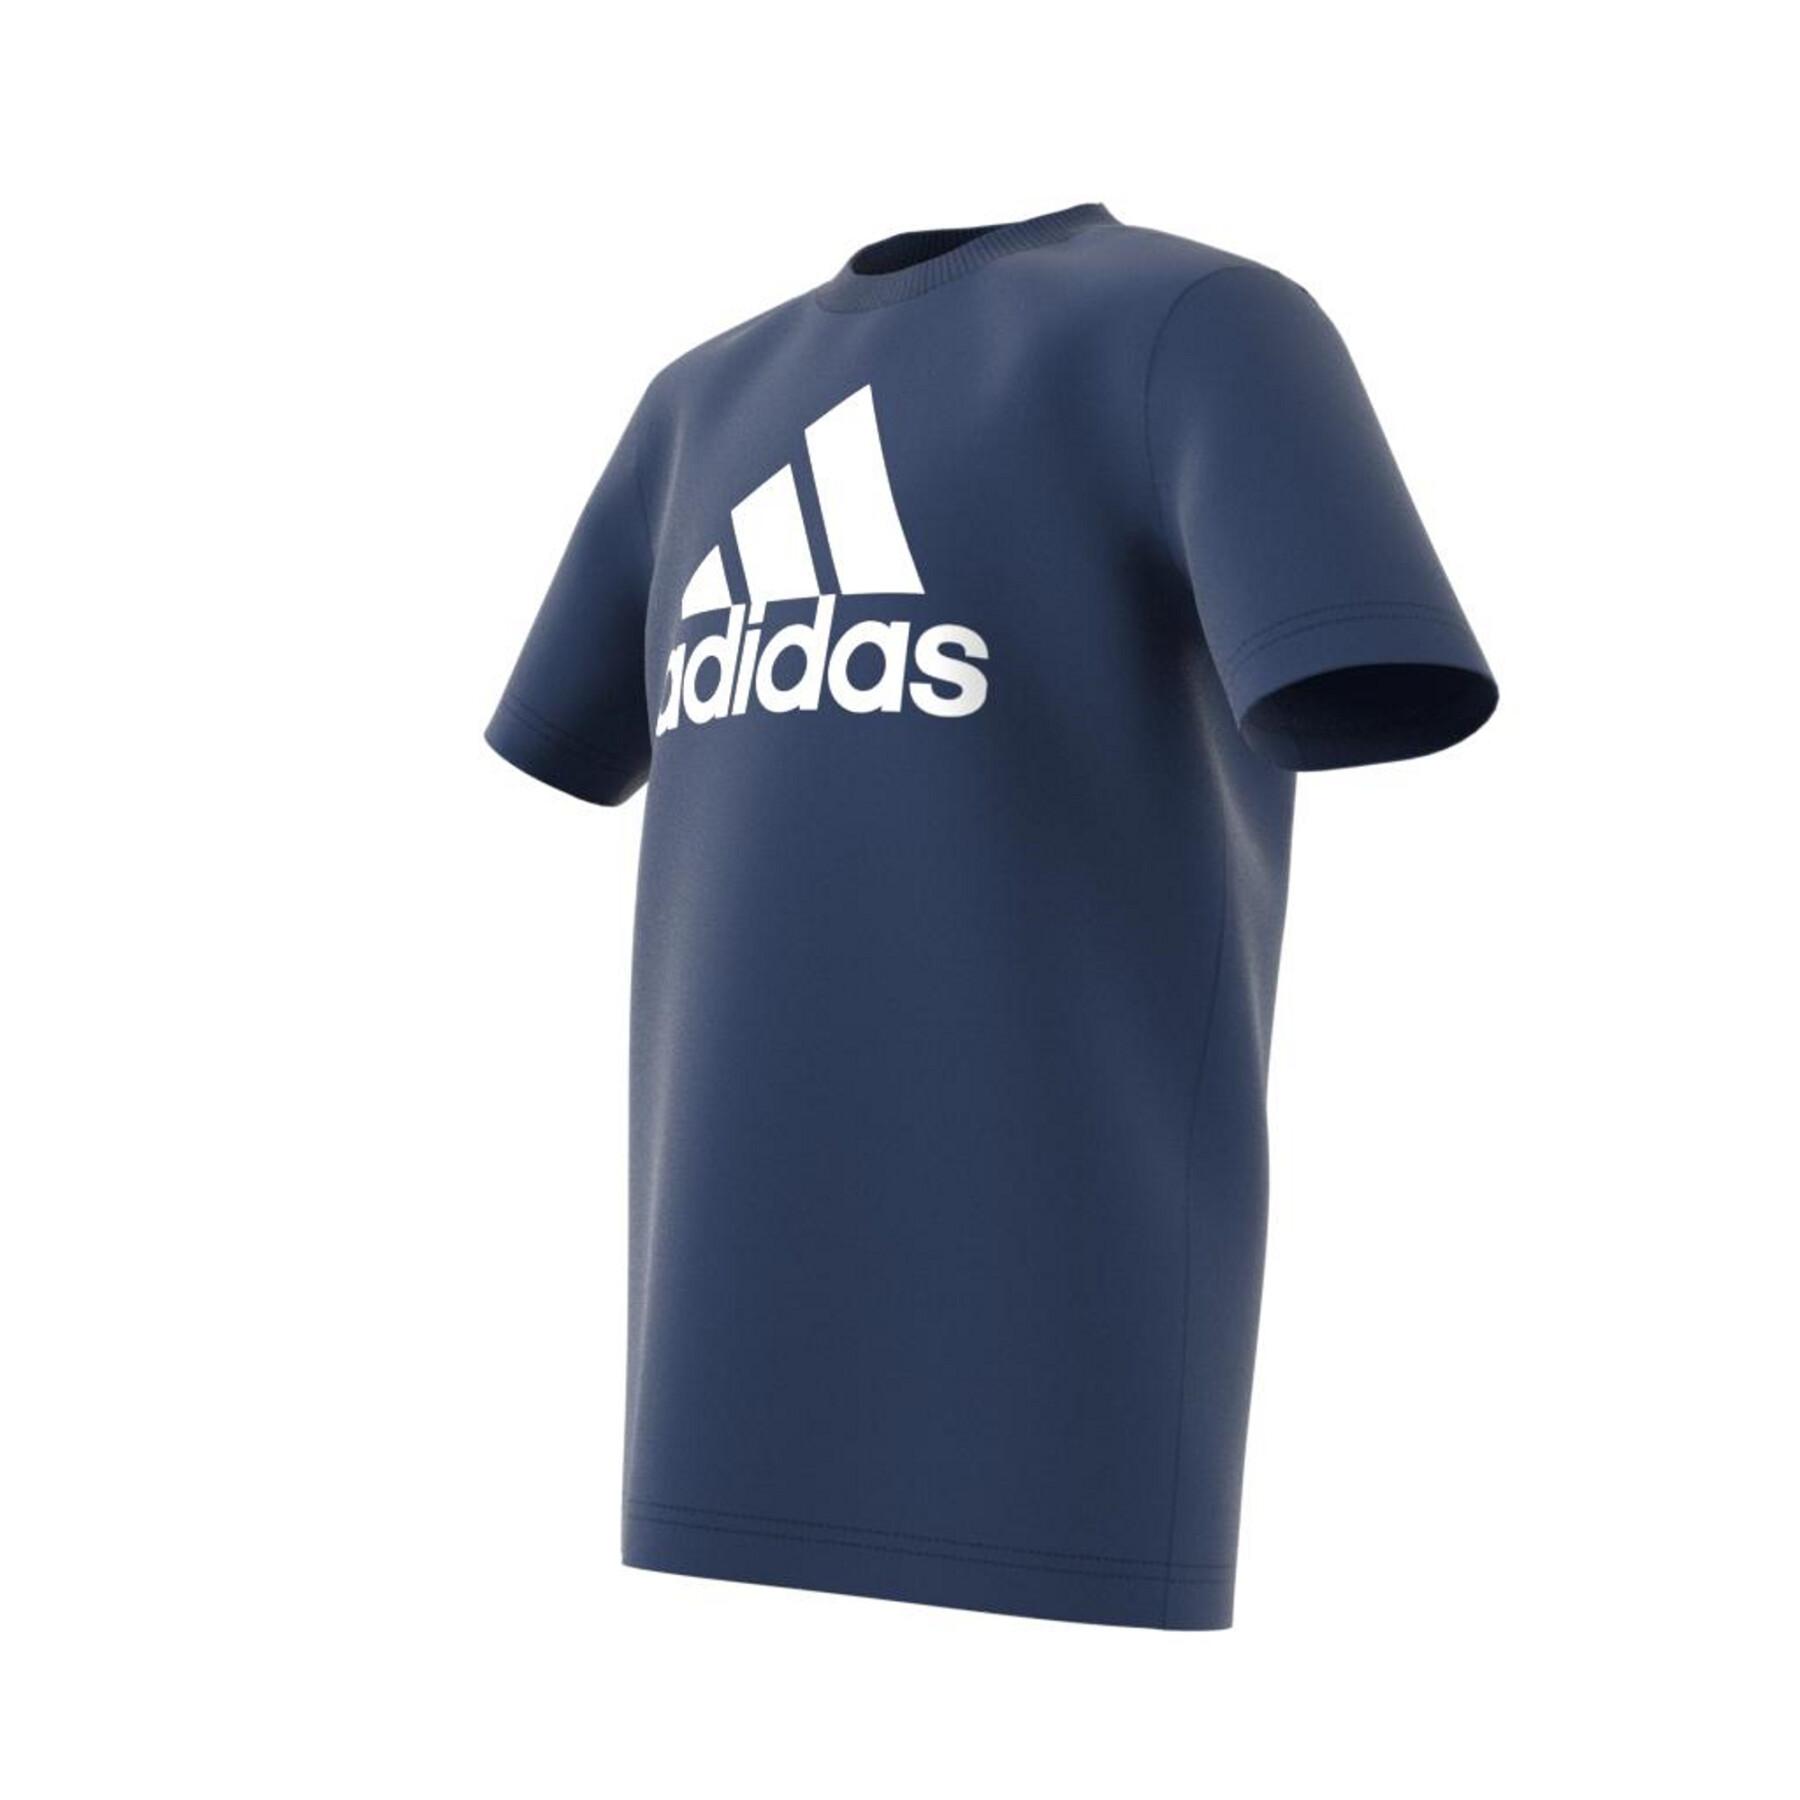 Child's T-shirt adidas Must Haves BoS